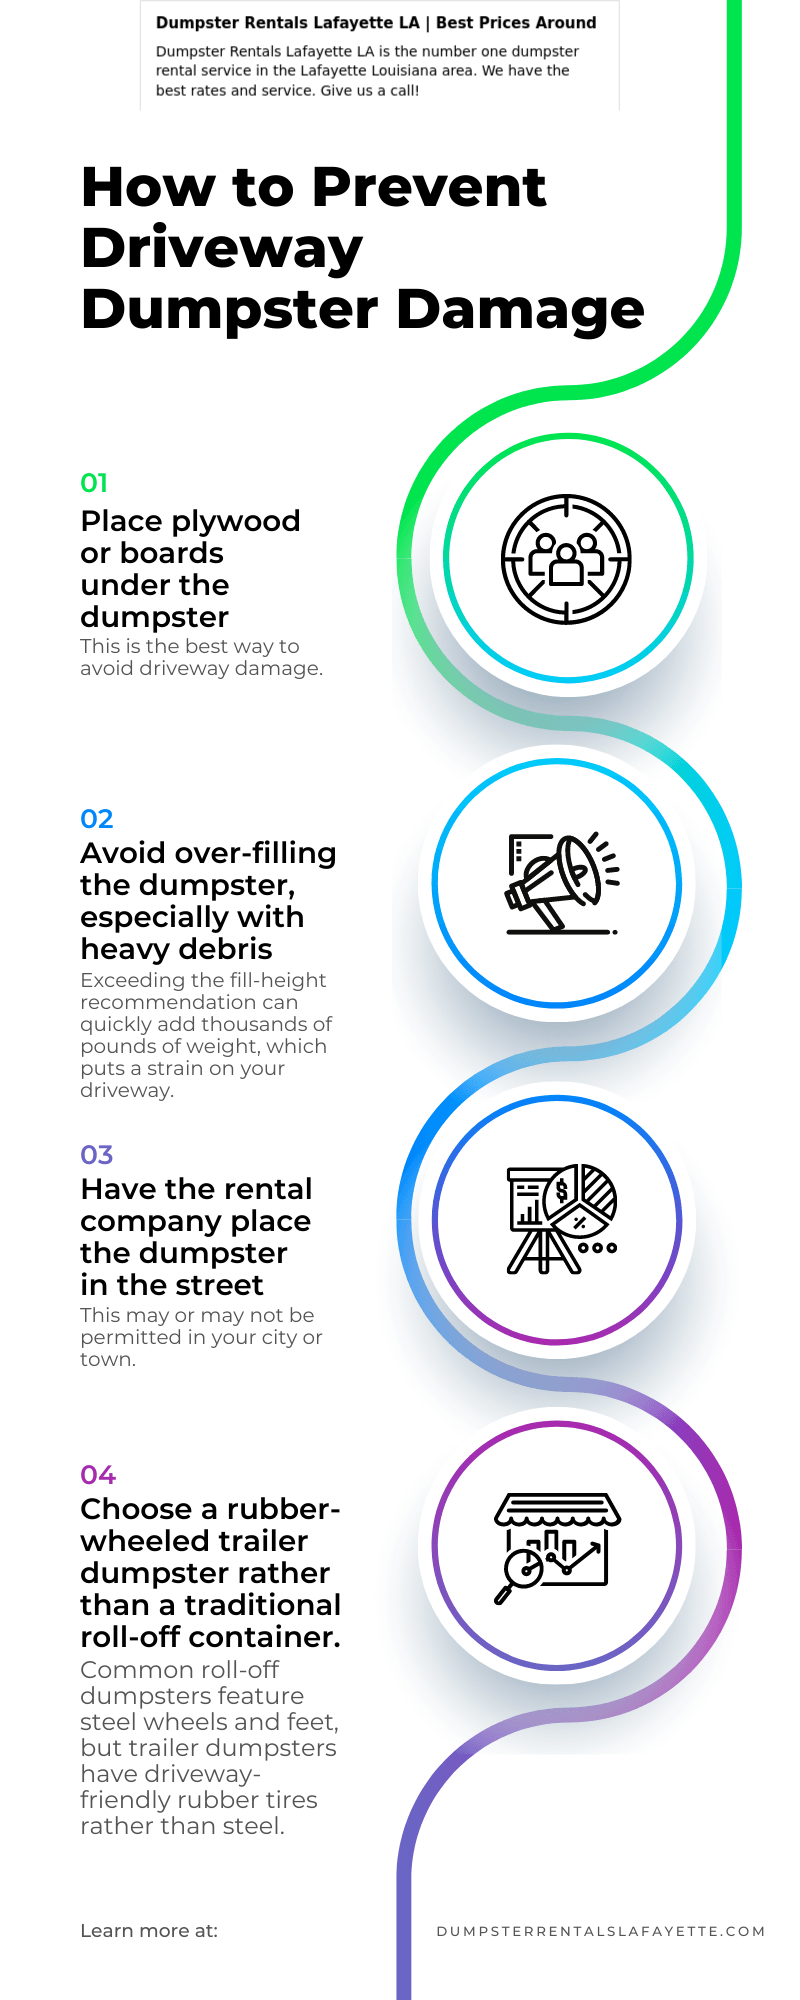 how to prevent driveway dumpster damage infographic